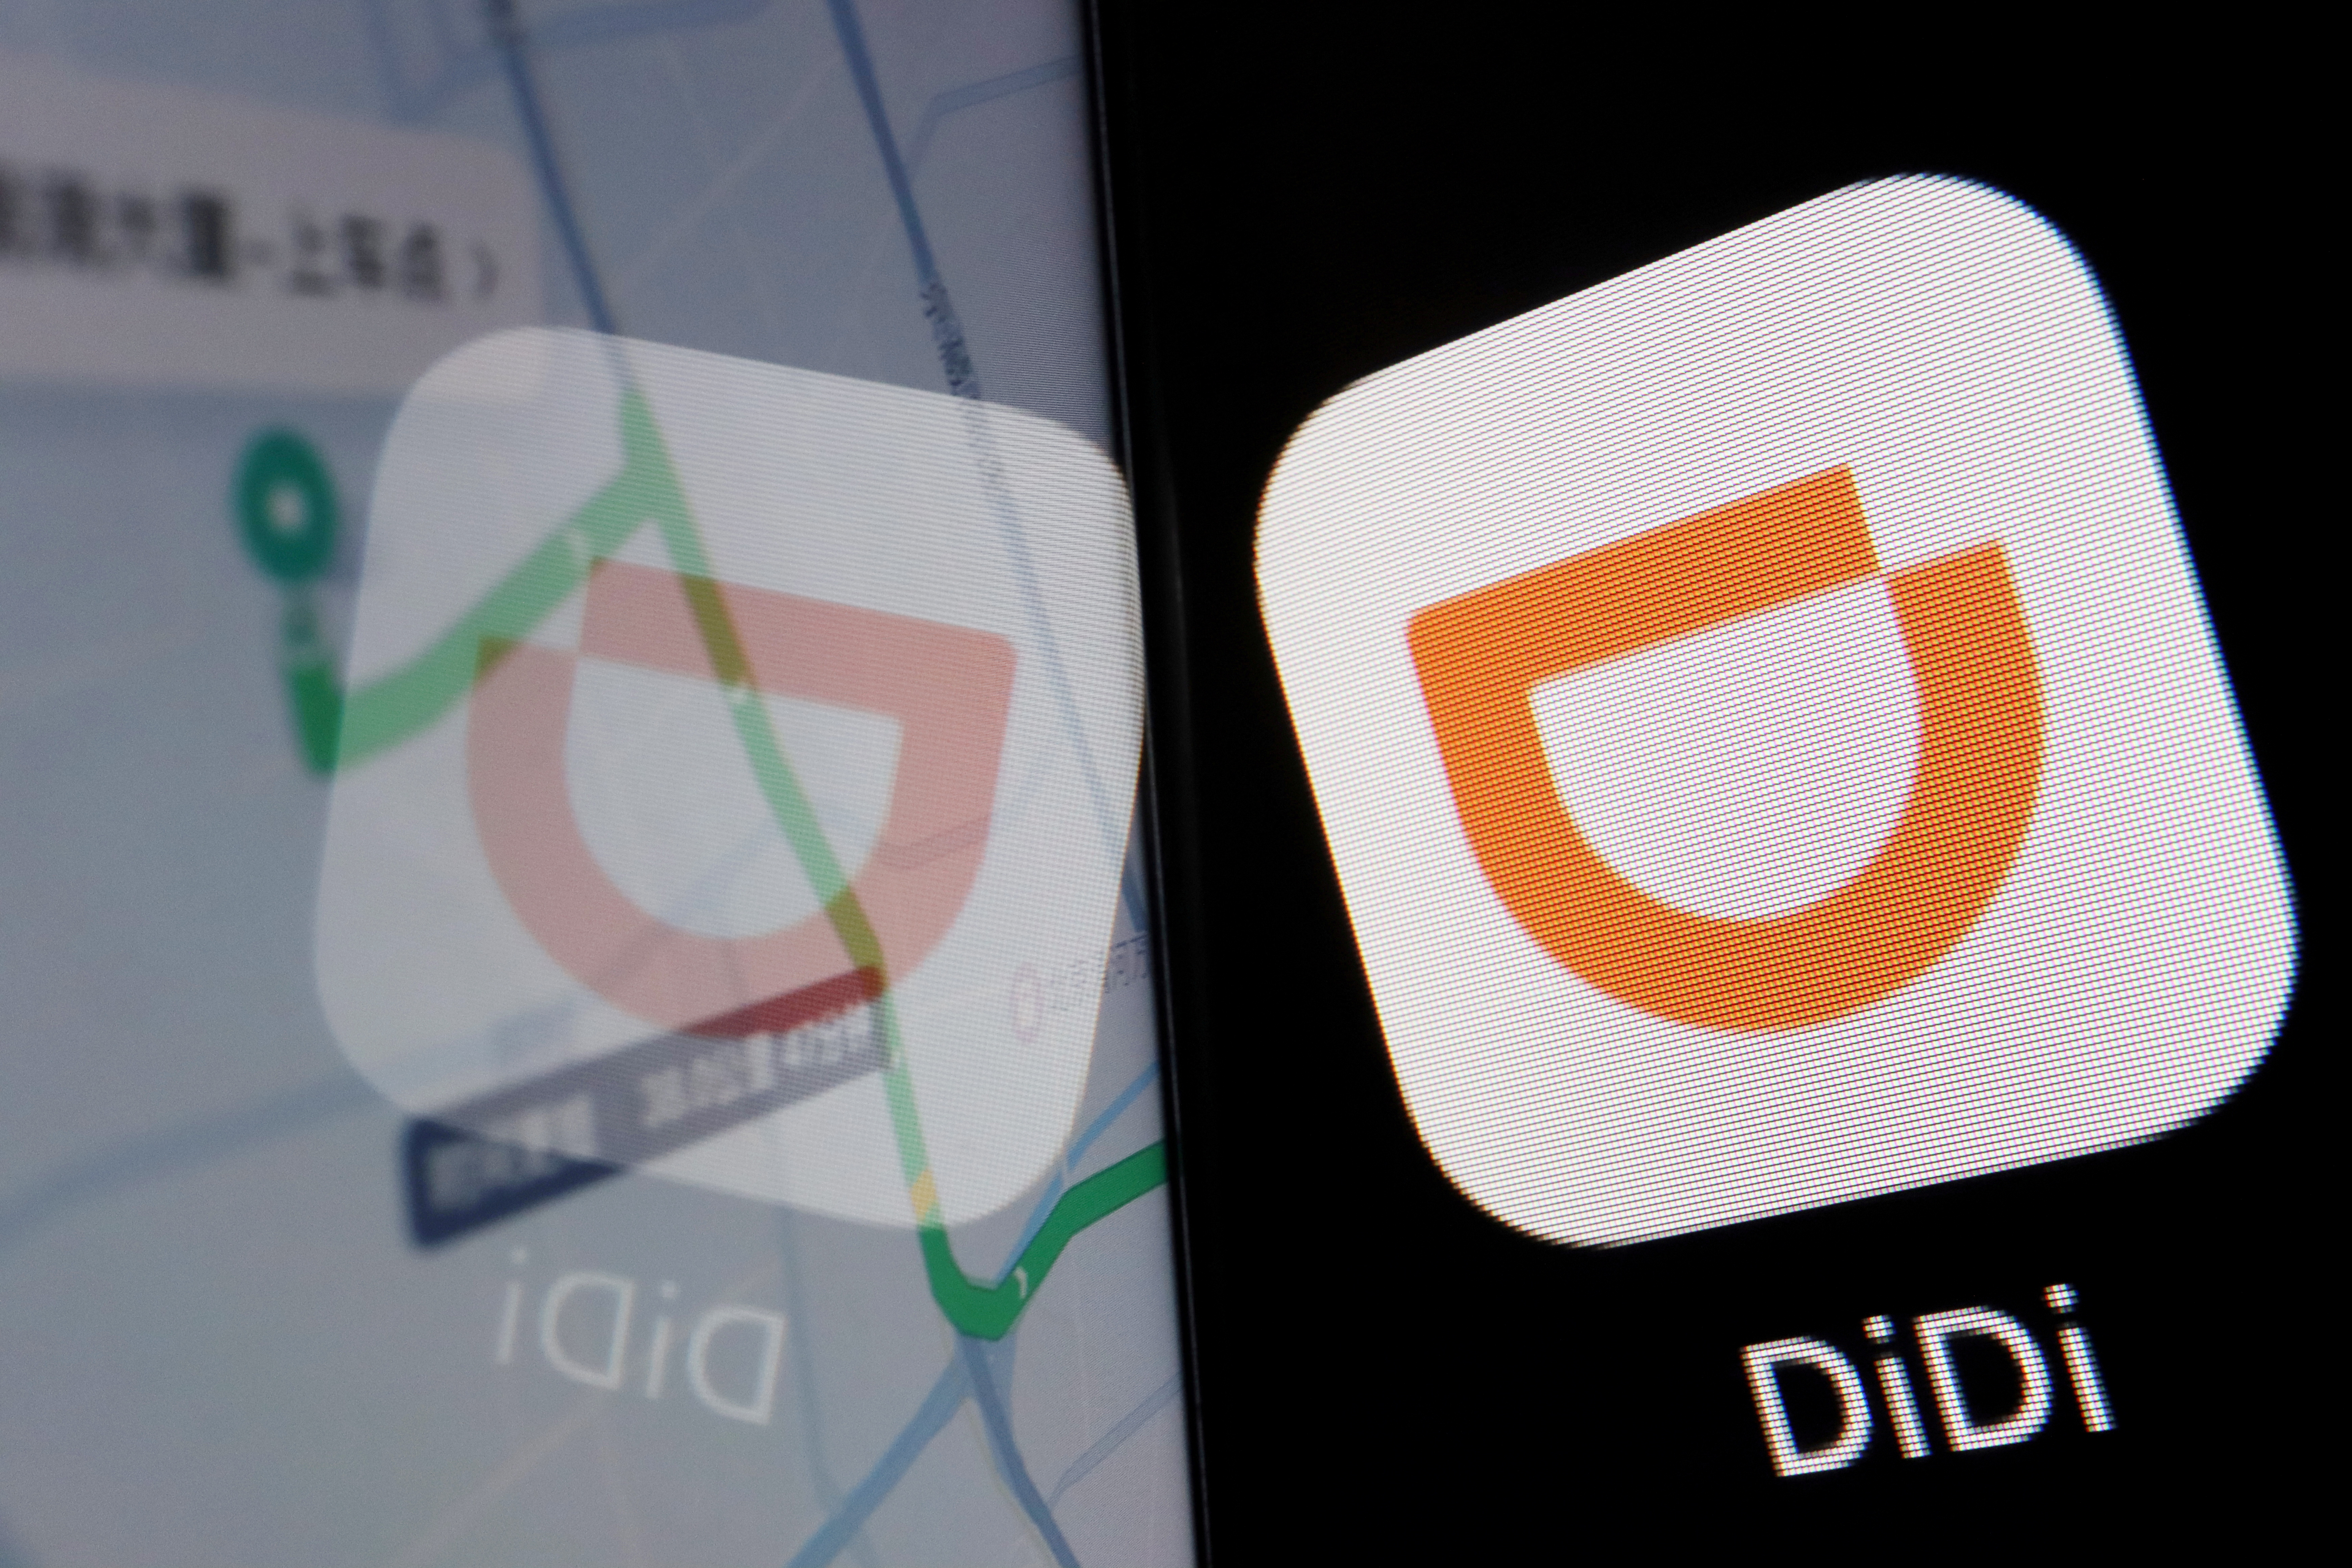 The app logo of Chinese ride-hailing giant Didi is seen reflected on its navigation map displayed on a mobile phone in this illustration picture taken July 1, 2021. REUTERS/Florence Lo/Illustration/File Photo